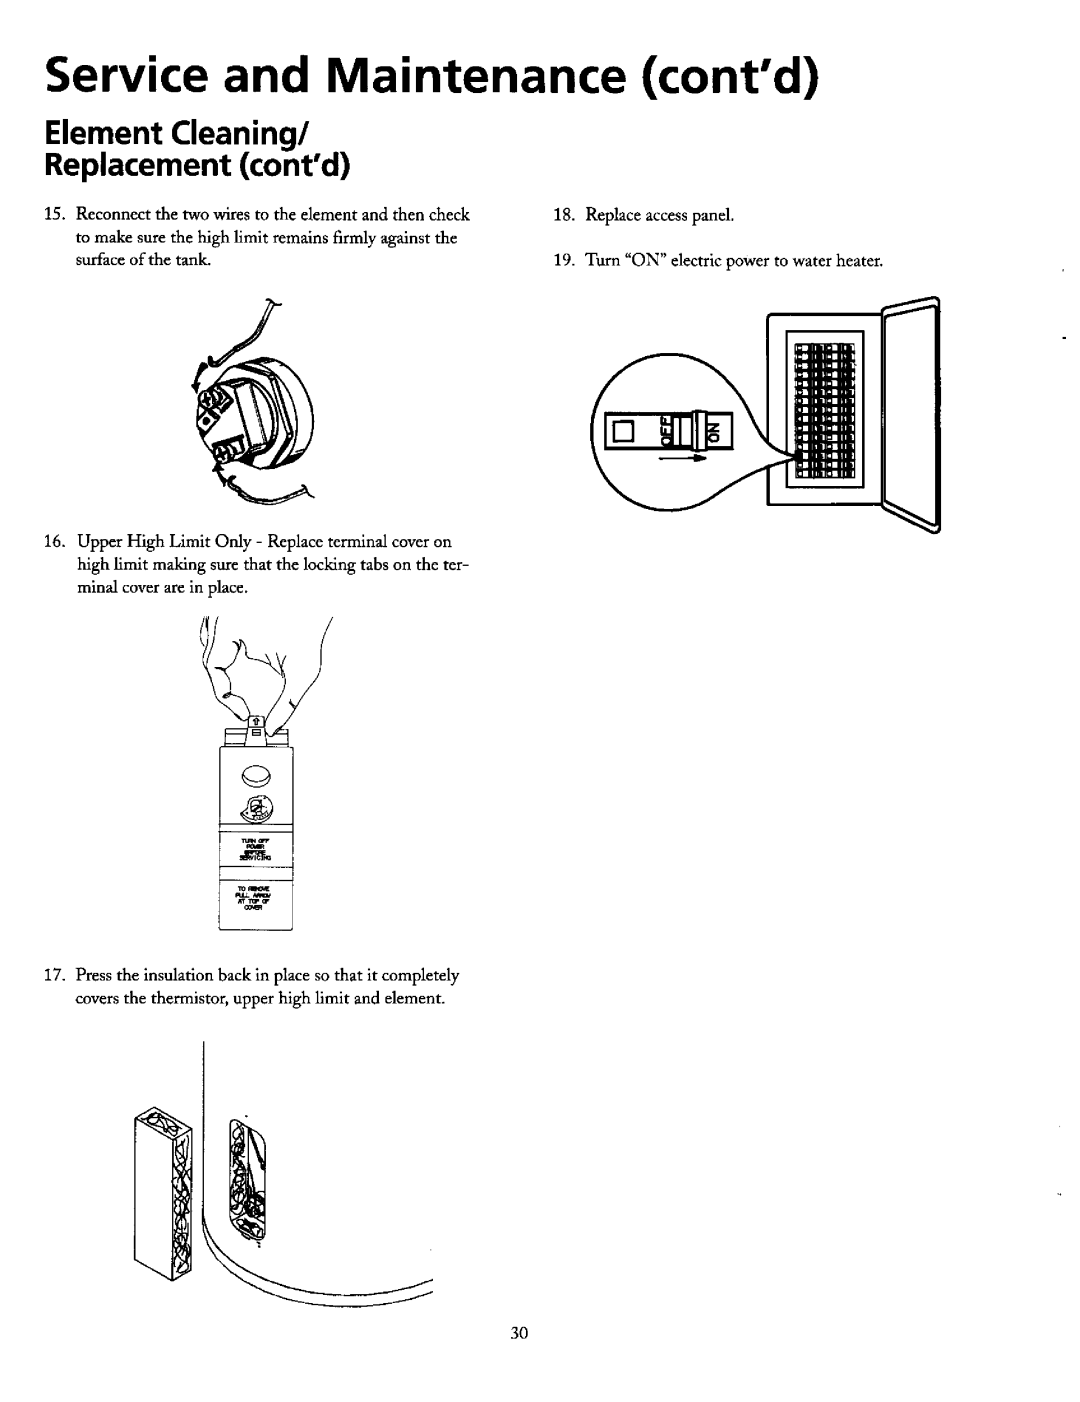 Maytag HE21250PC, HE21282PC operating instructions Element Cleaning, Replacement contd, Service and Maintenance contd 